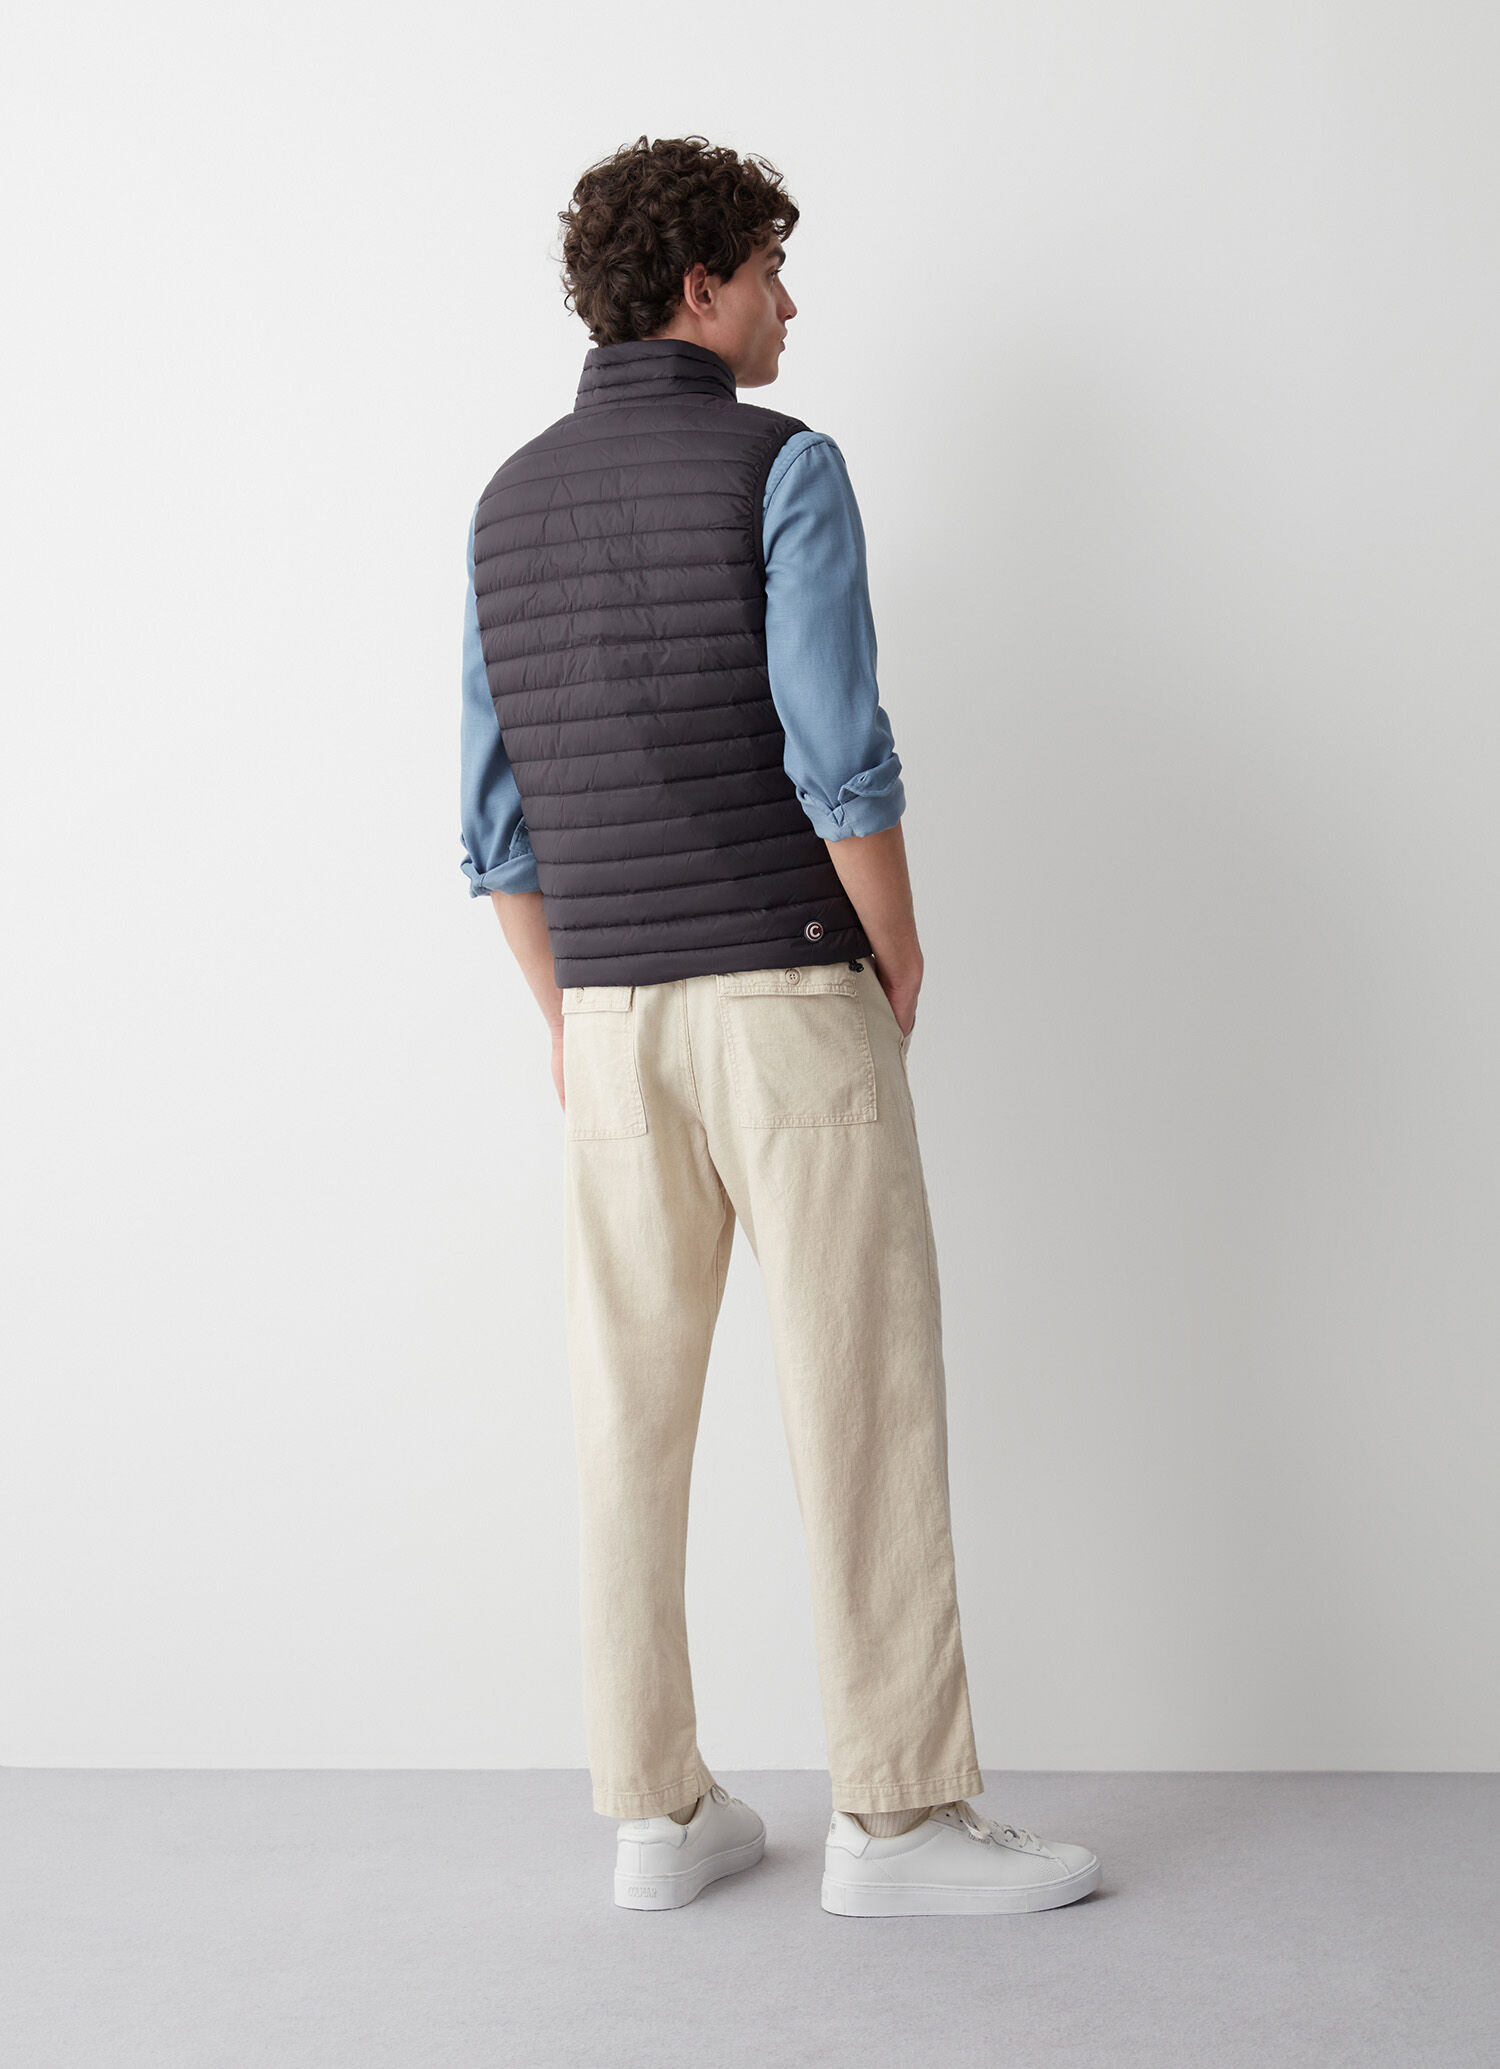 Gilets for men: down vest and sleeveless jackets | Colmar